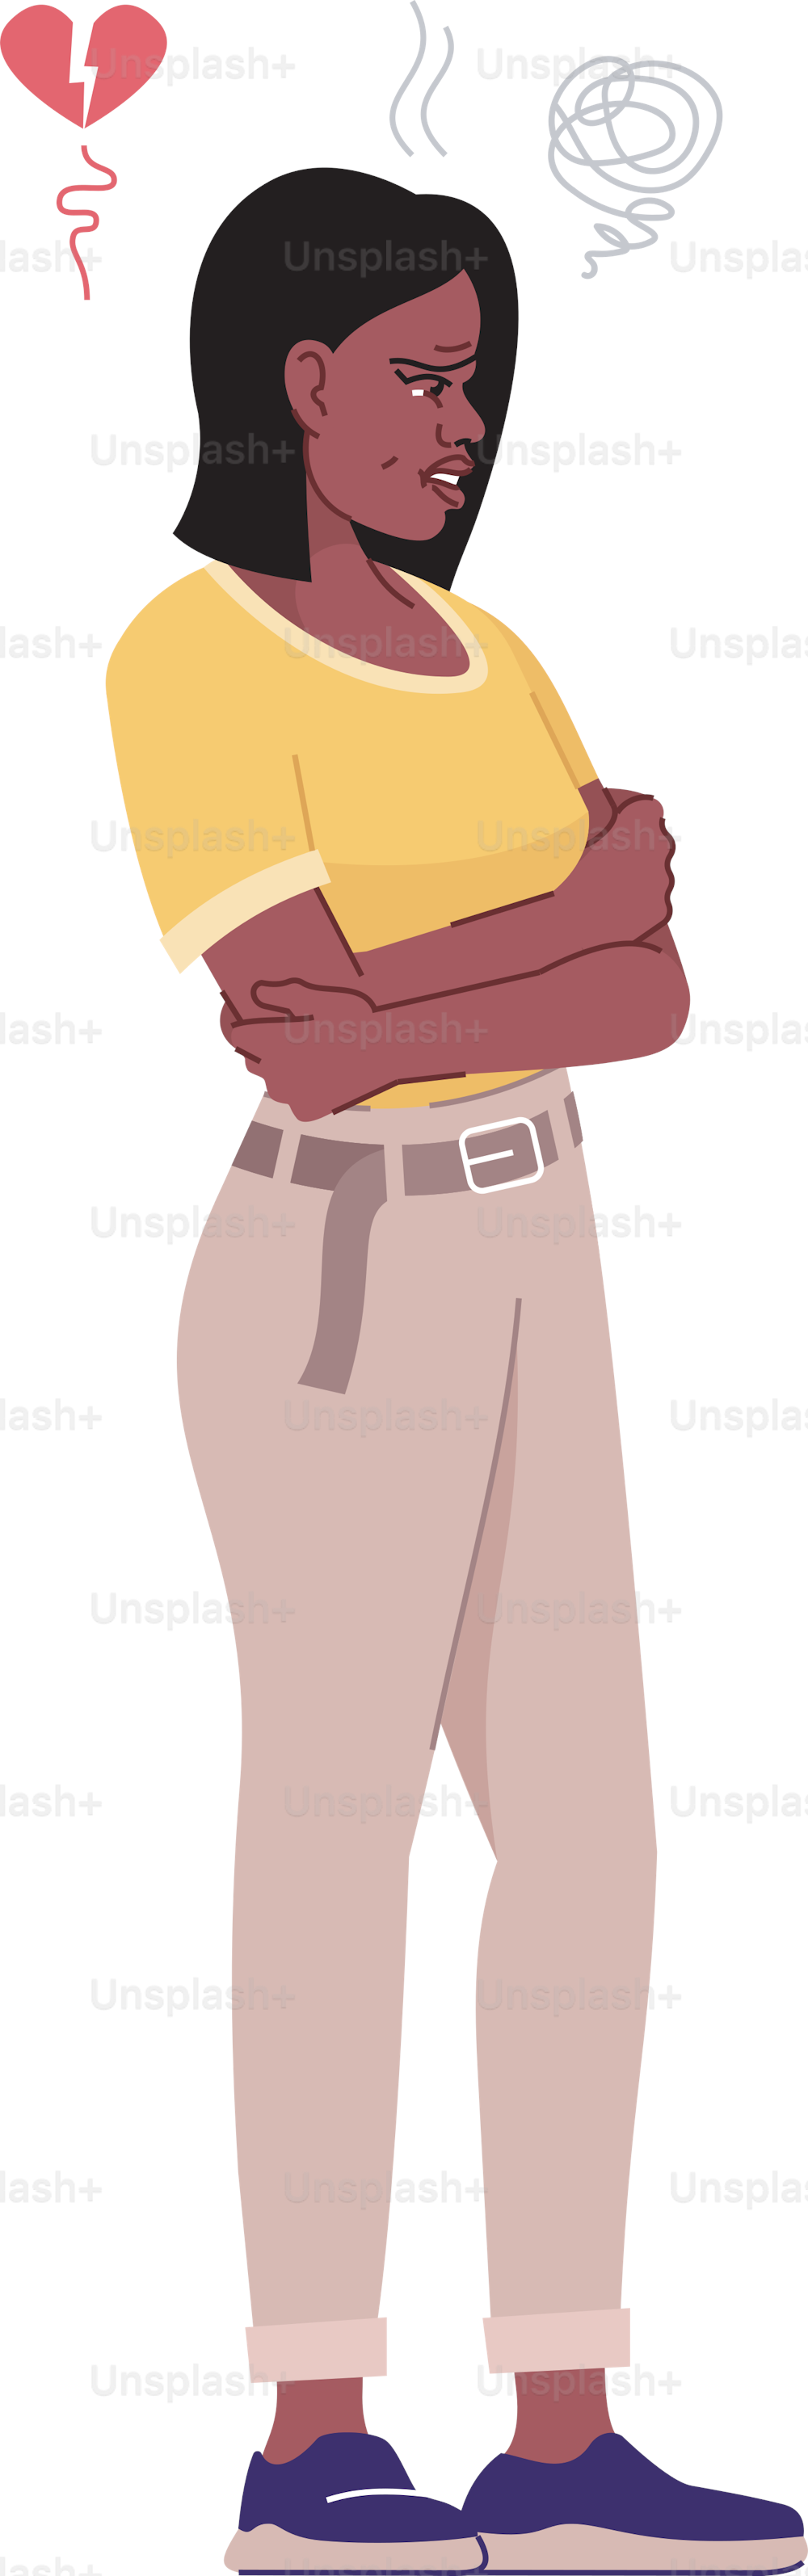 Angry woman flat vector illustration. Relationship crisis. Broken love, resentment. Irritated wife standing with crossed arms isolated cartoon character with outline elements on white background